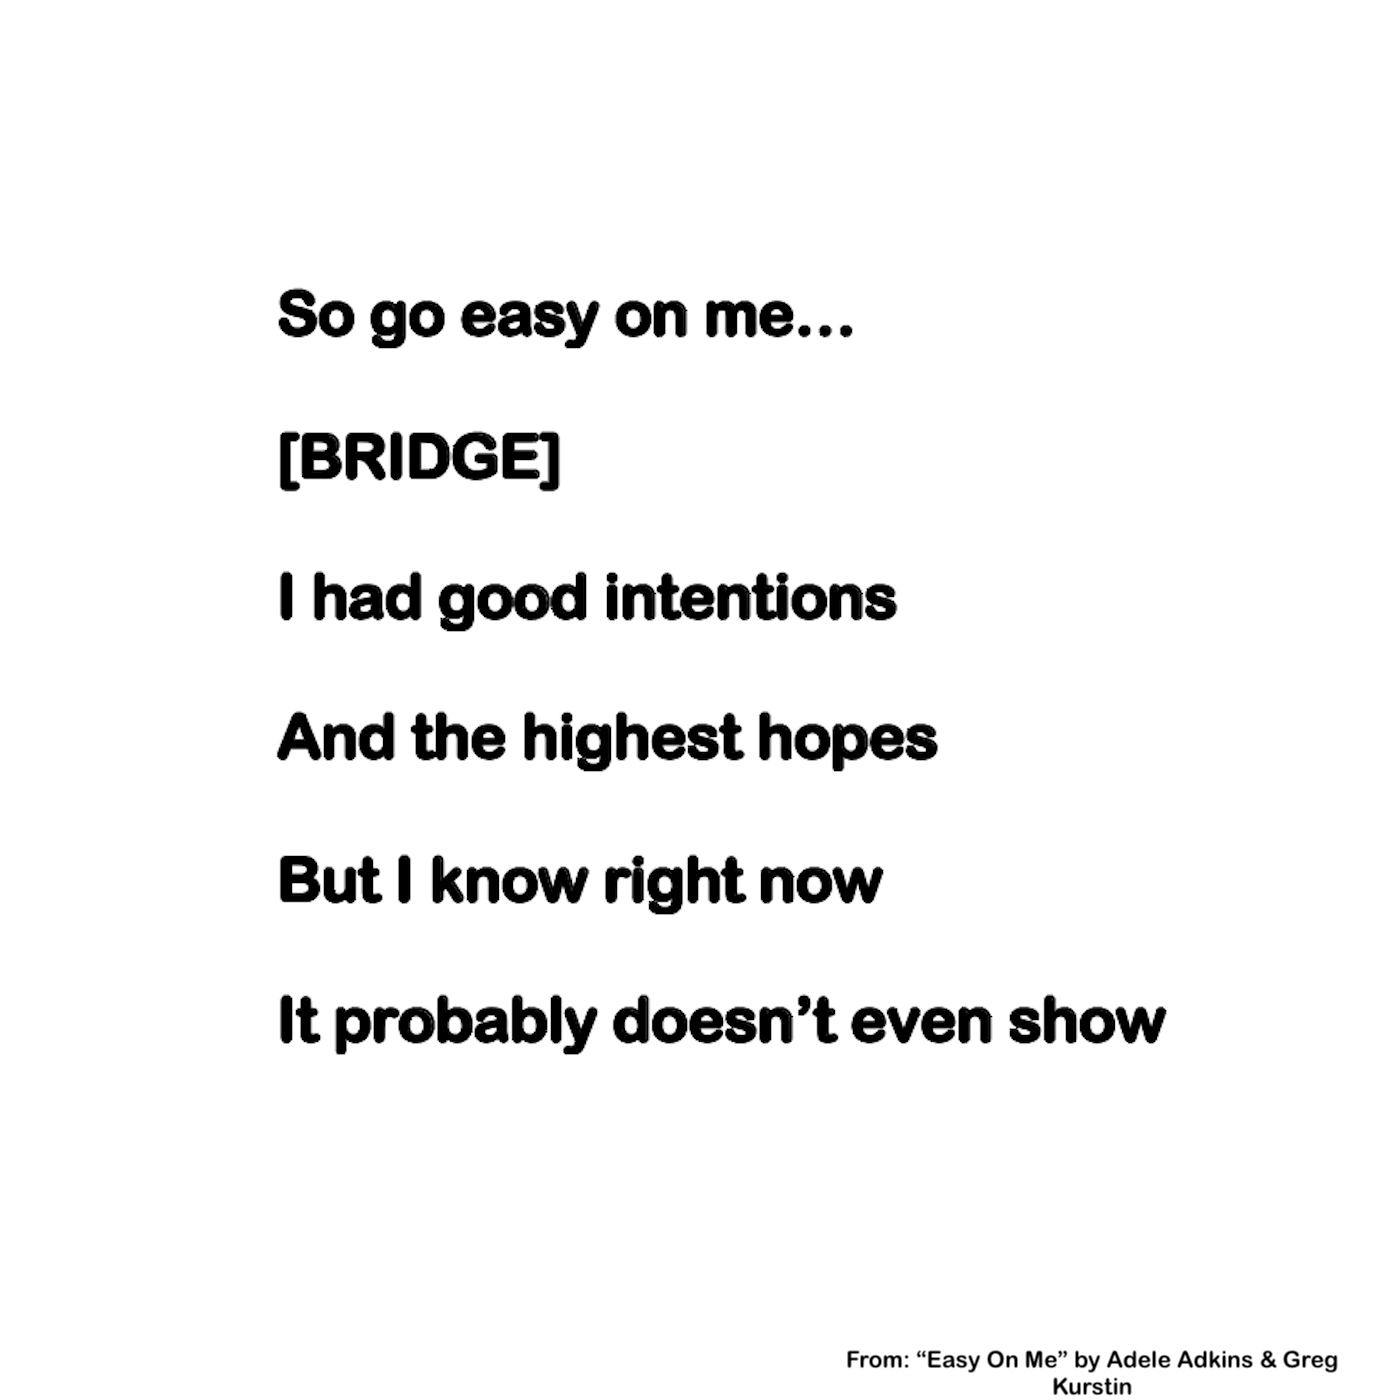 24 How to sing "Easy On Me" by Adele: The Bridge